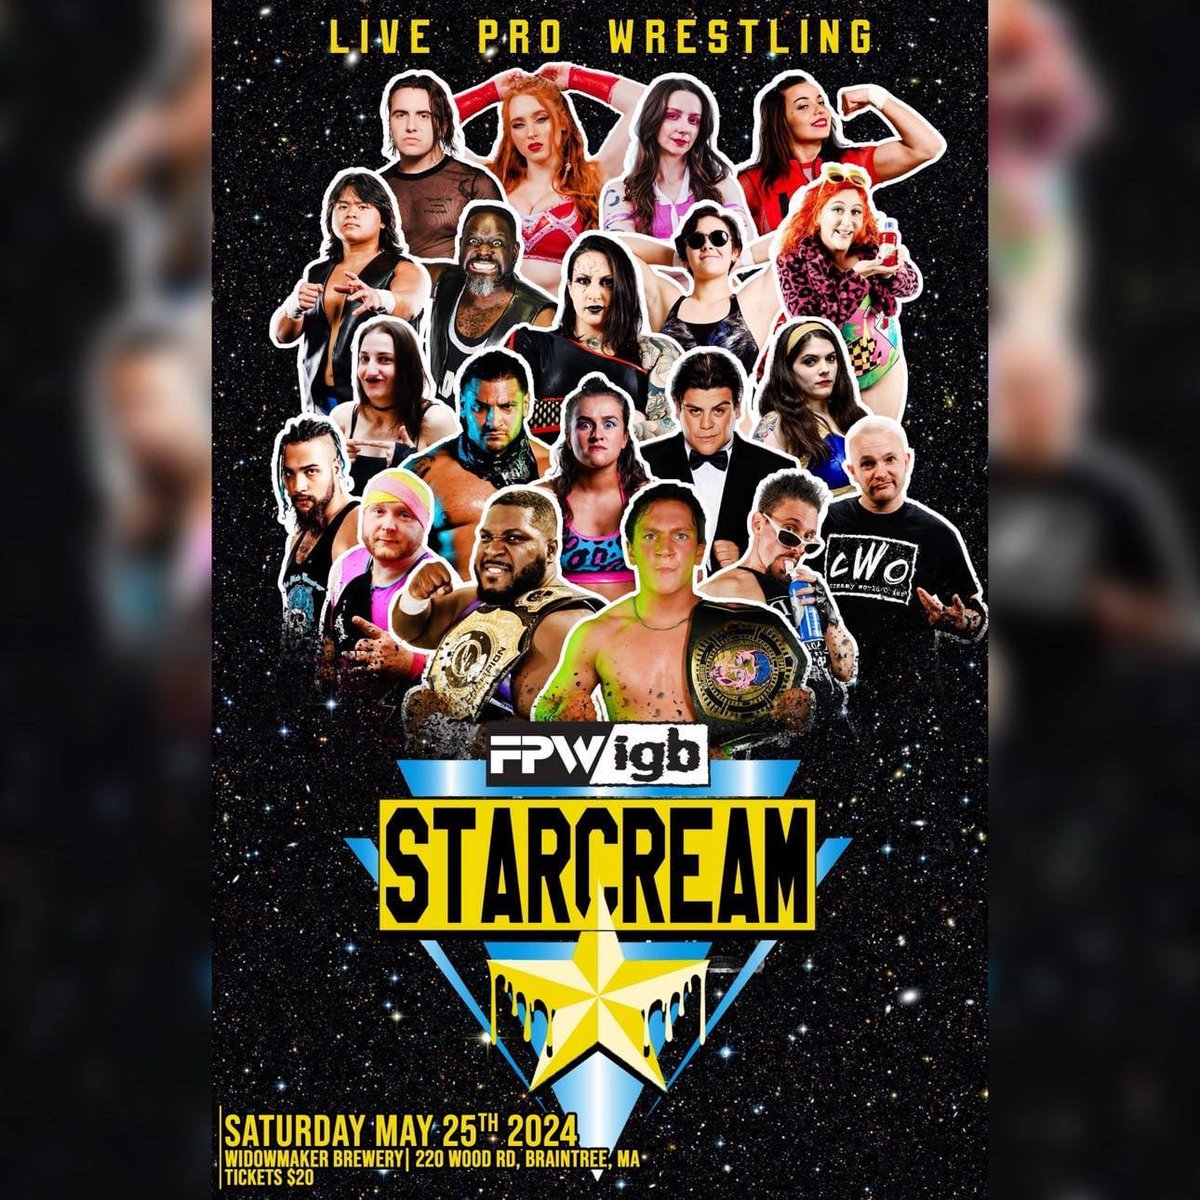 PRO WRESTLING AT #BRAINTREE BREWERY!!! All ages welcomed at @WidowmakerBrew ! Focus Pro/ @IGBonanza present #STARCREAM Saturday May 25th Tickets on Sale tinyurl.com/FPWIGBStarCream #bostonbrewery #massachusetts #brewery #prowrestling #wrestling #boston #widowmaker #beerevent